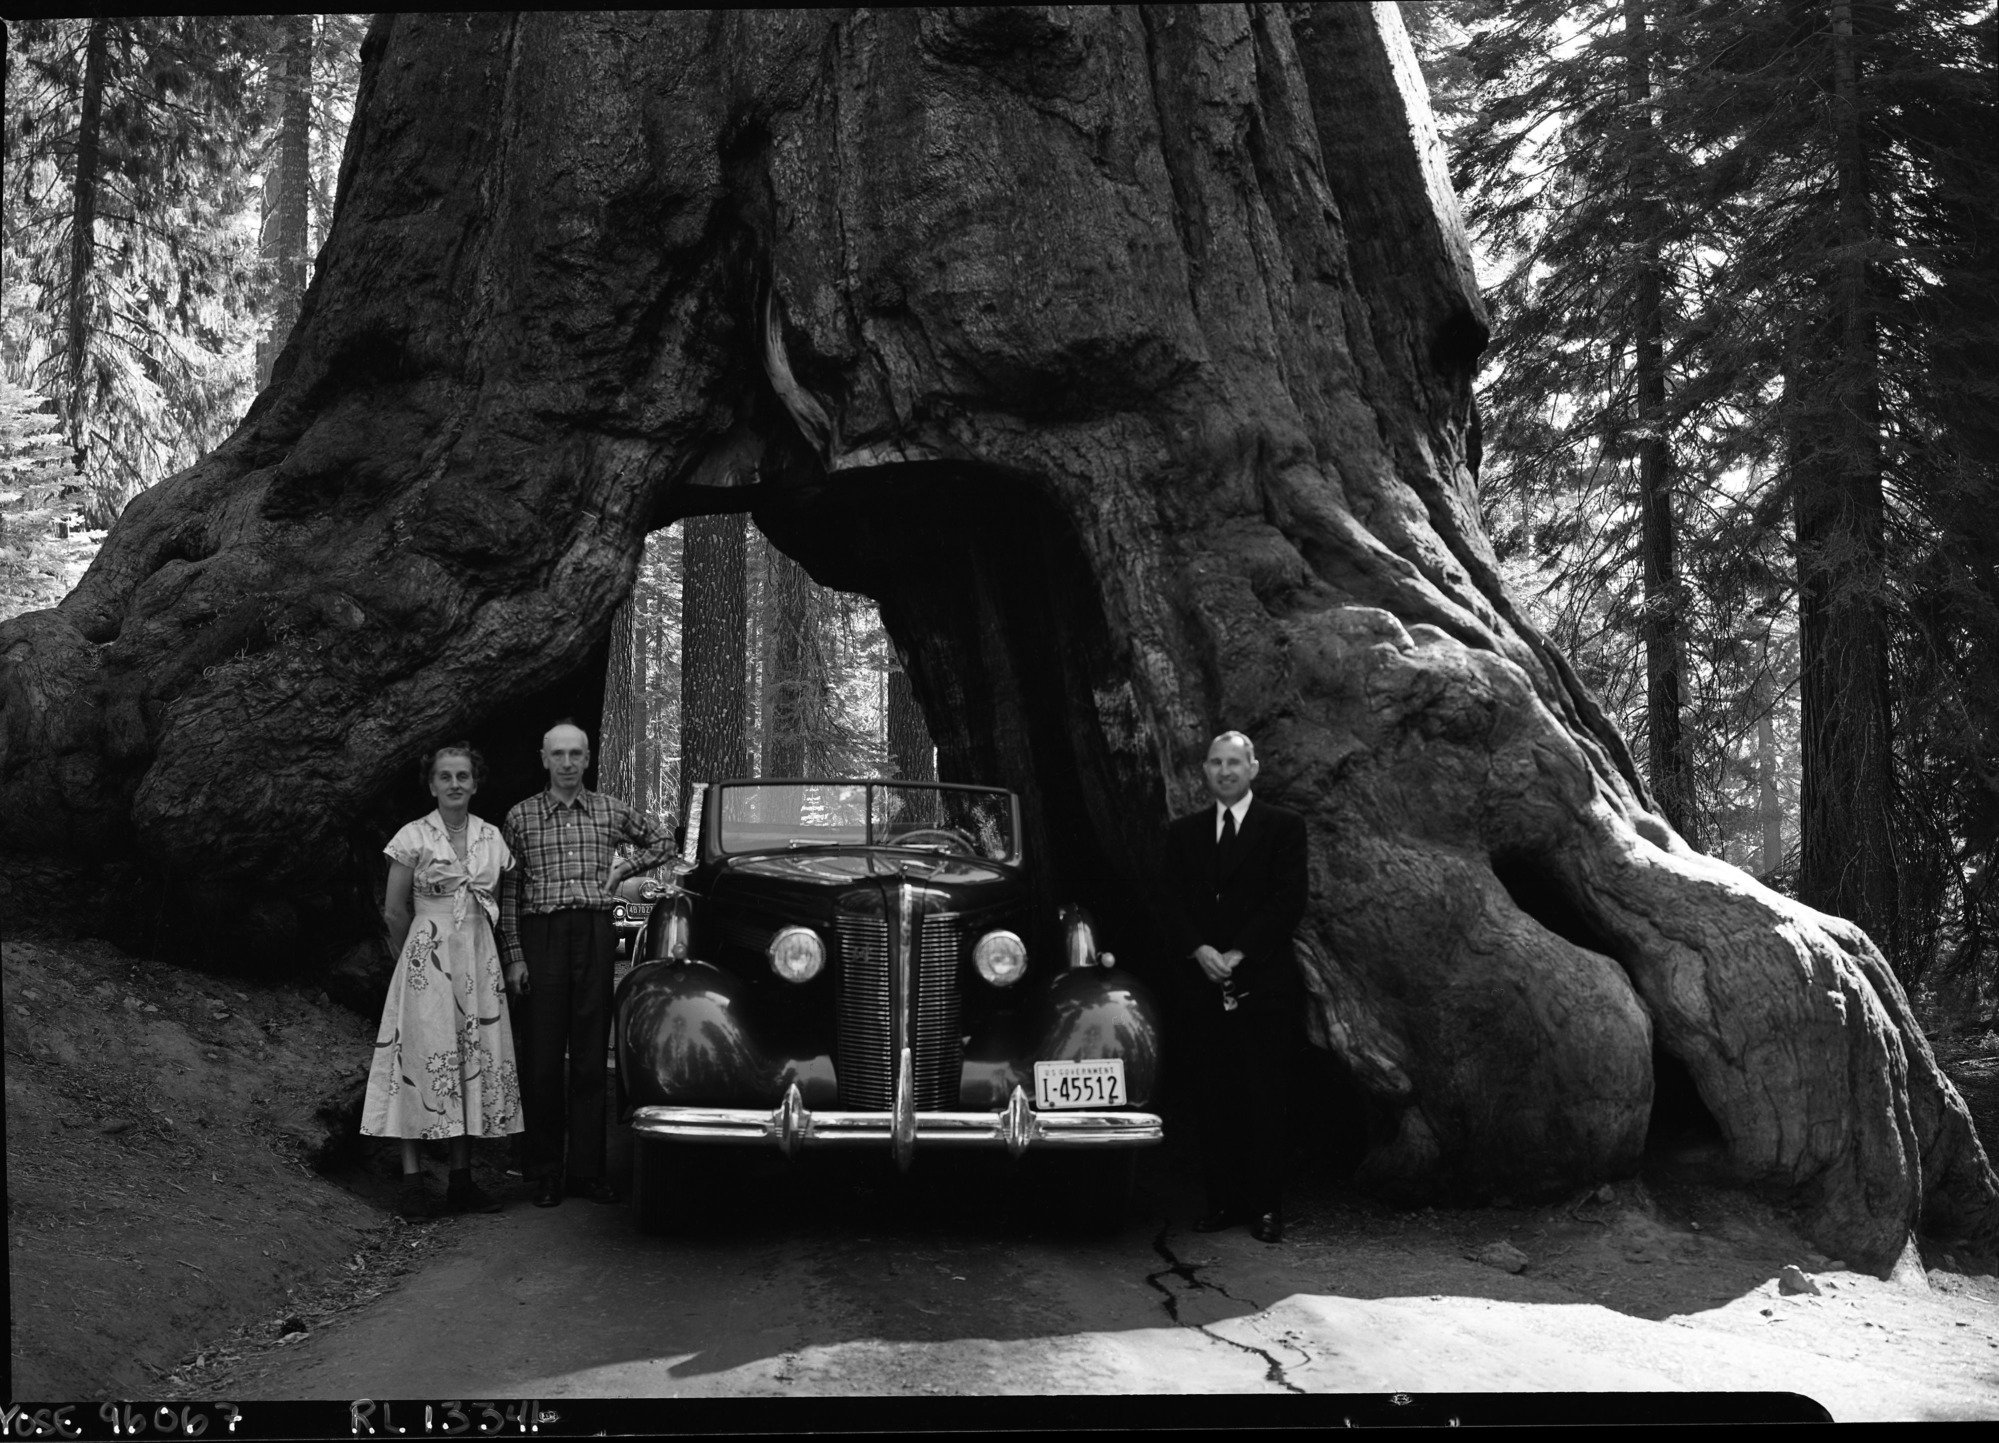 Mr. & Mrs. Ralph Assheton and their chauffeur, Gilbert at the Wawona Tunnel Tree. Mr. Assheton is a Member of the British Parliament, a close friend of Winston Churchill, and a member of the Privy Council.